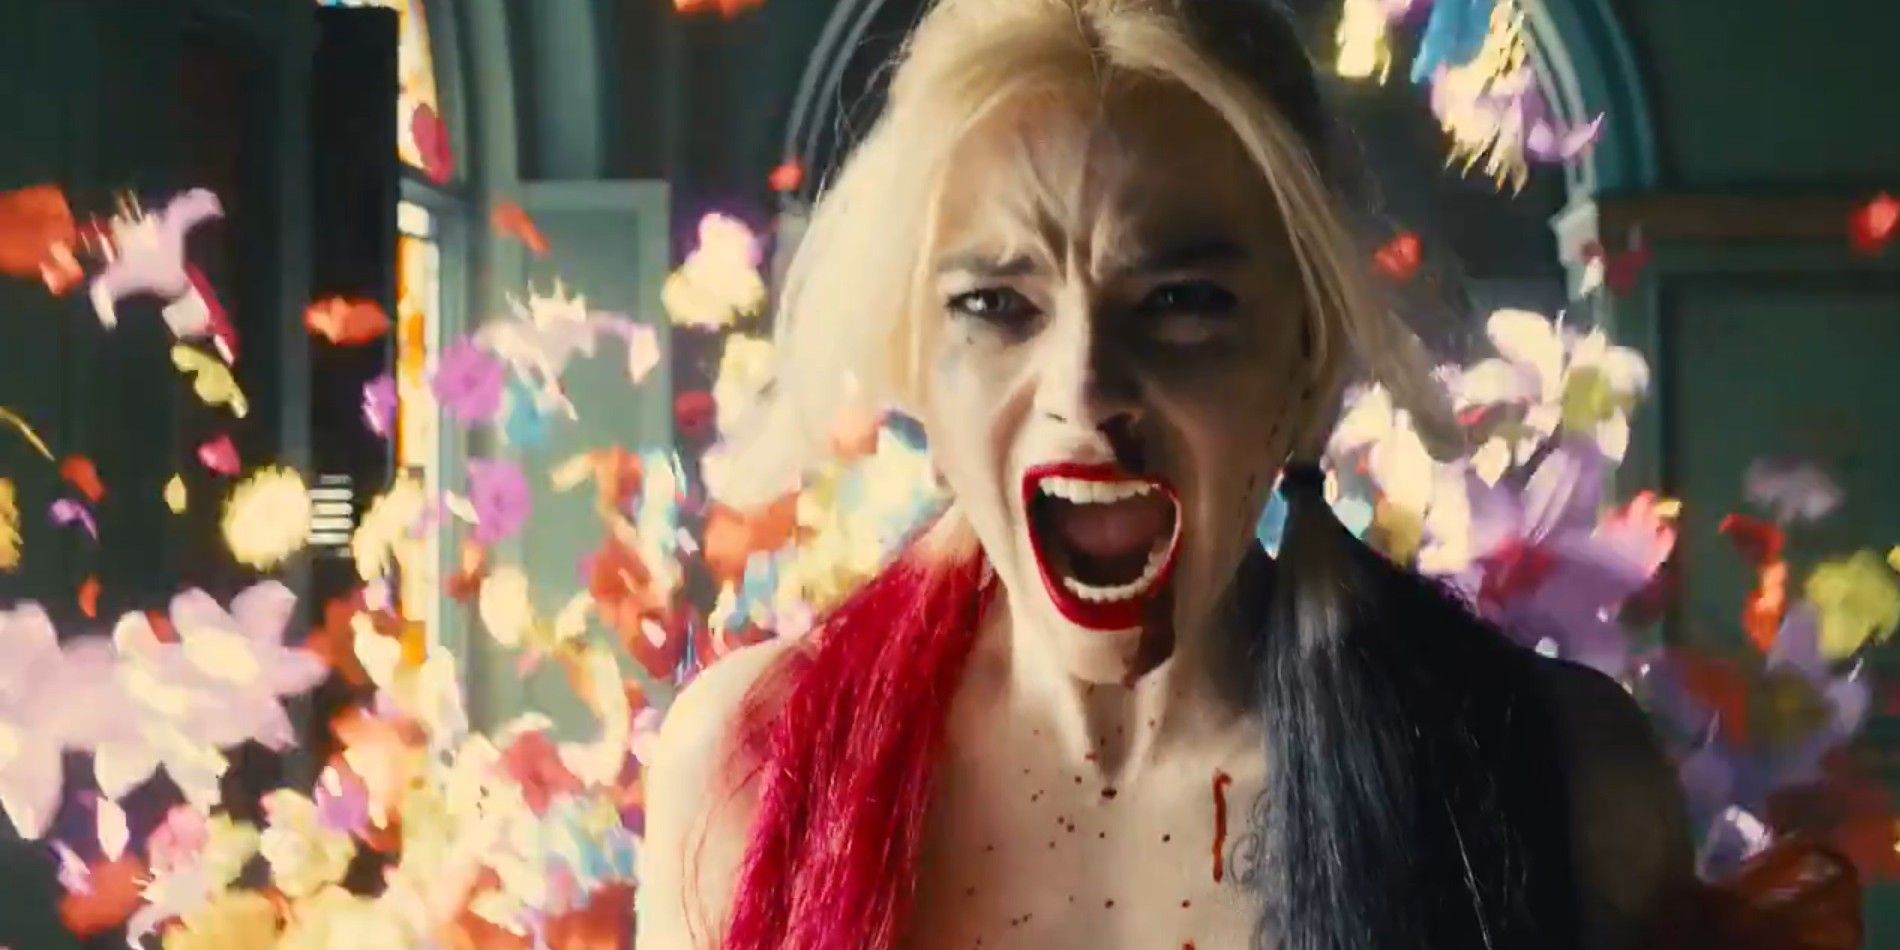 Harley runs and screams as flowers explode around her